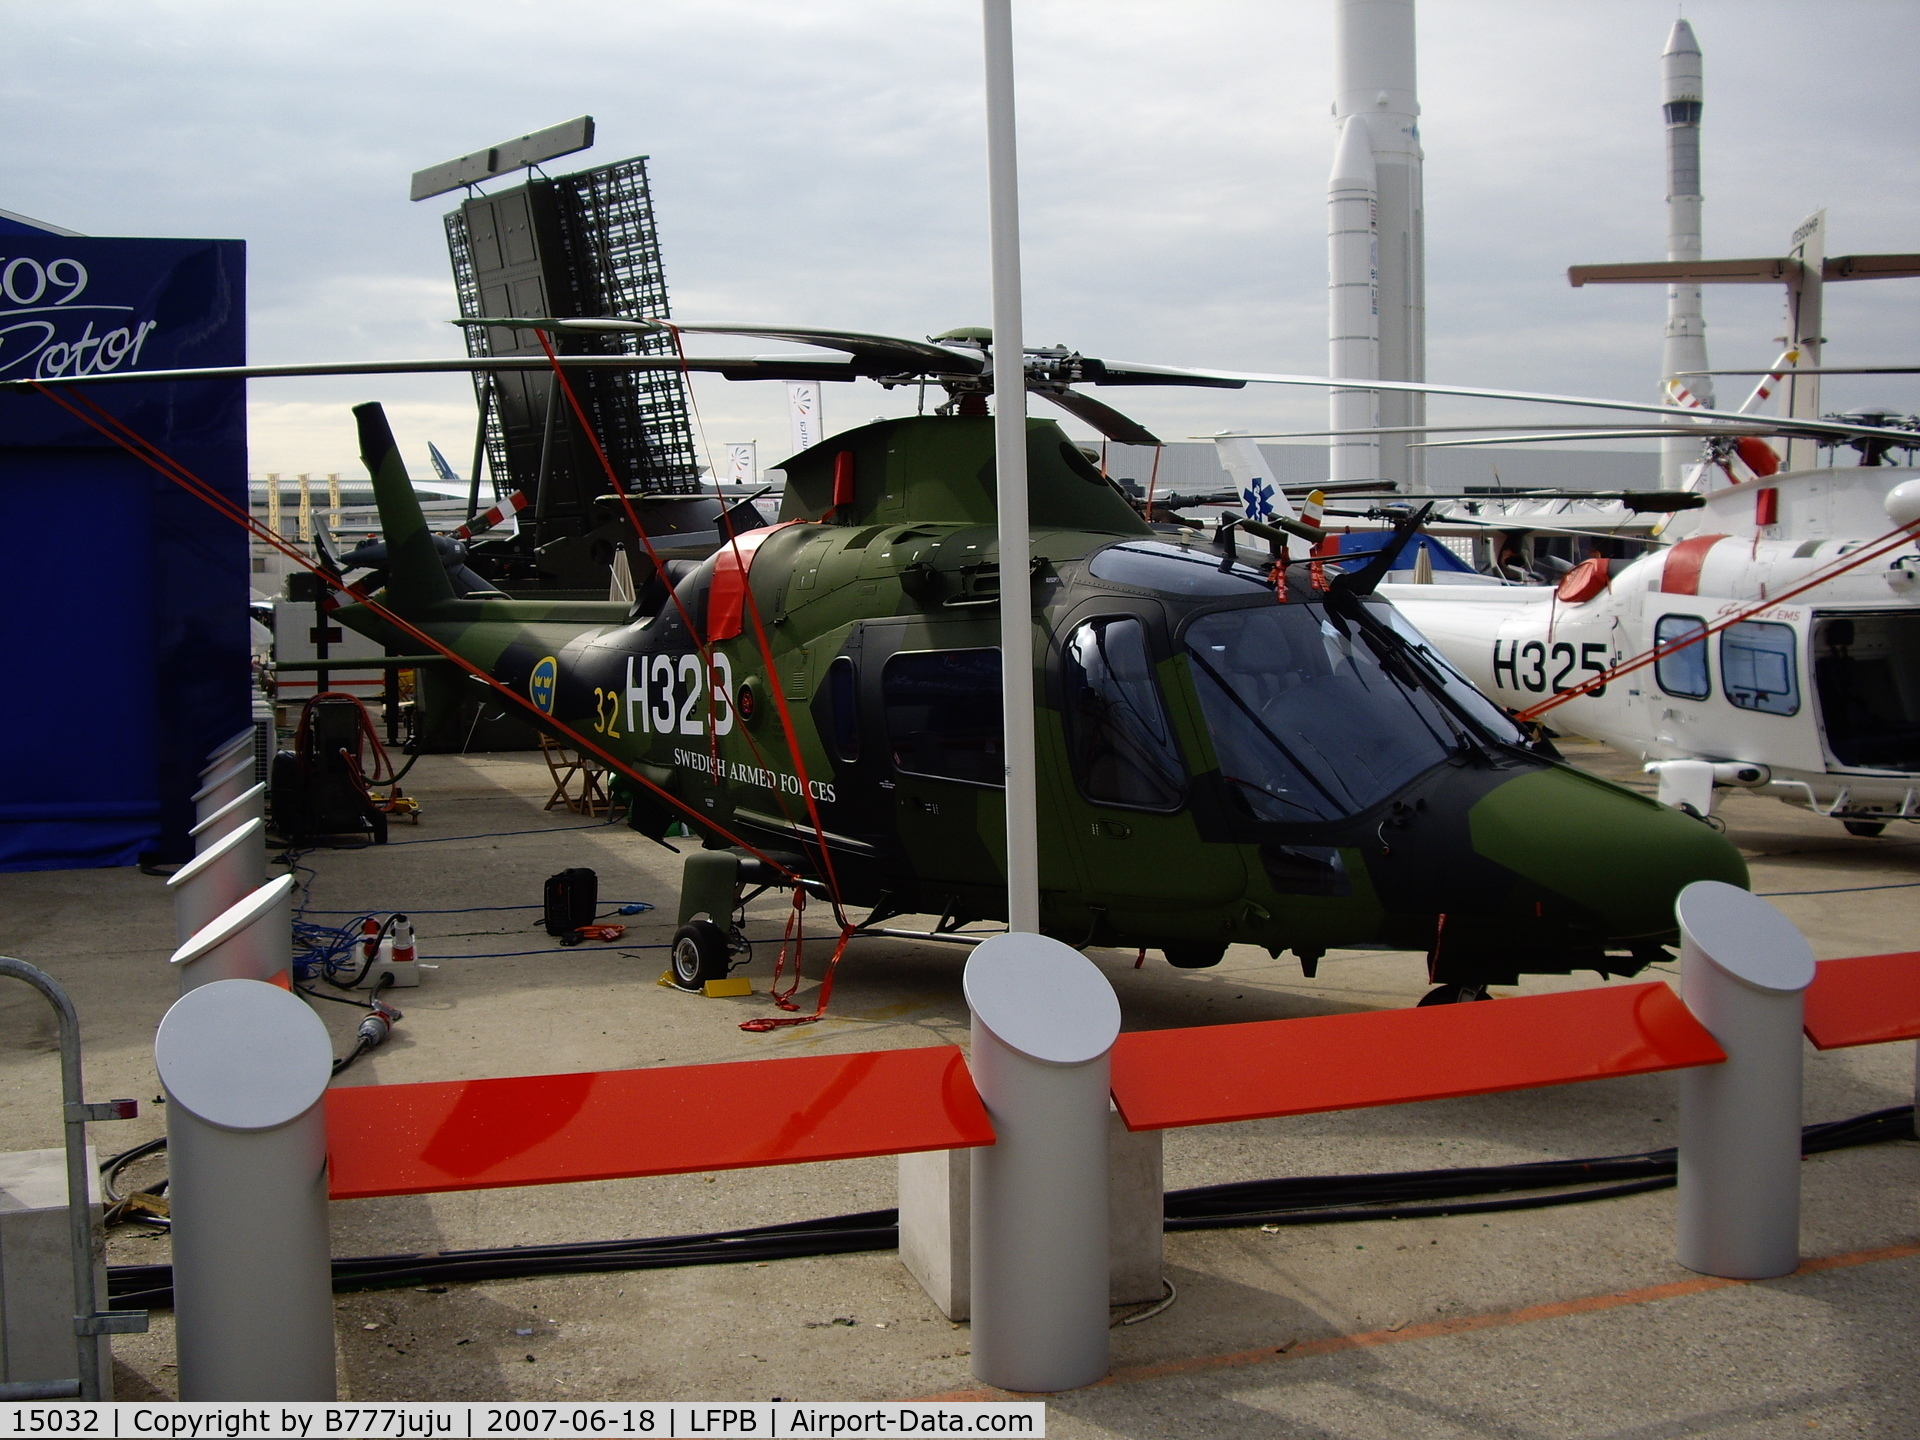 15032, Agusta Hkp15 (A-109E LUH) C/N 13762, on display at SIAE 2007